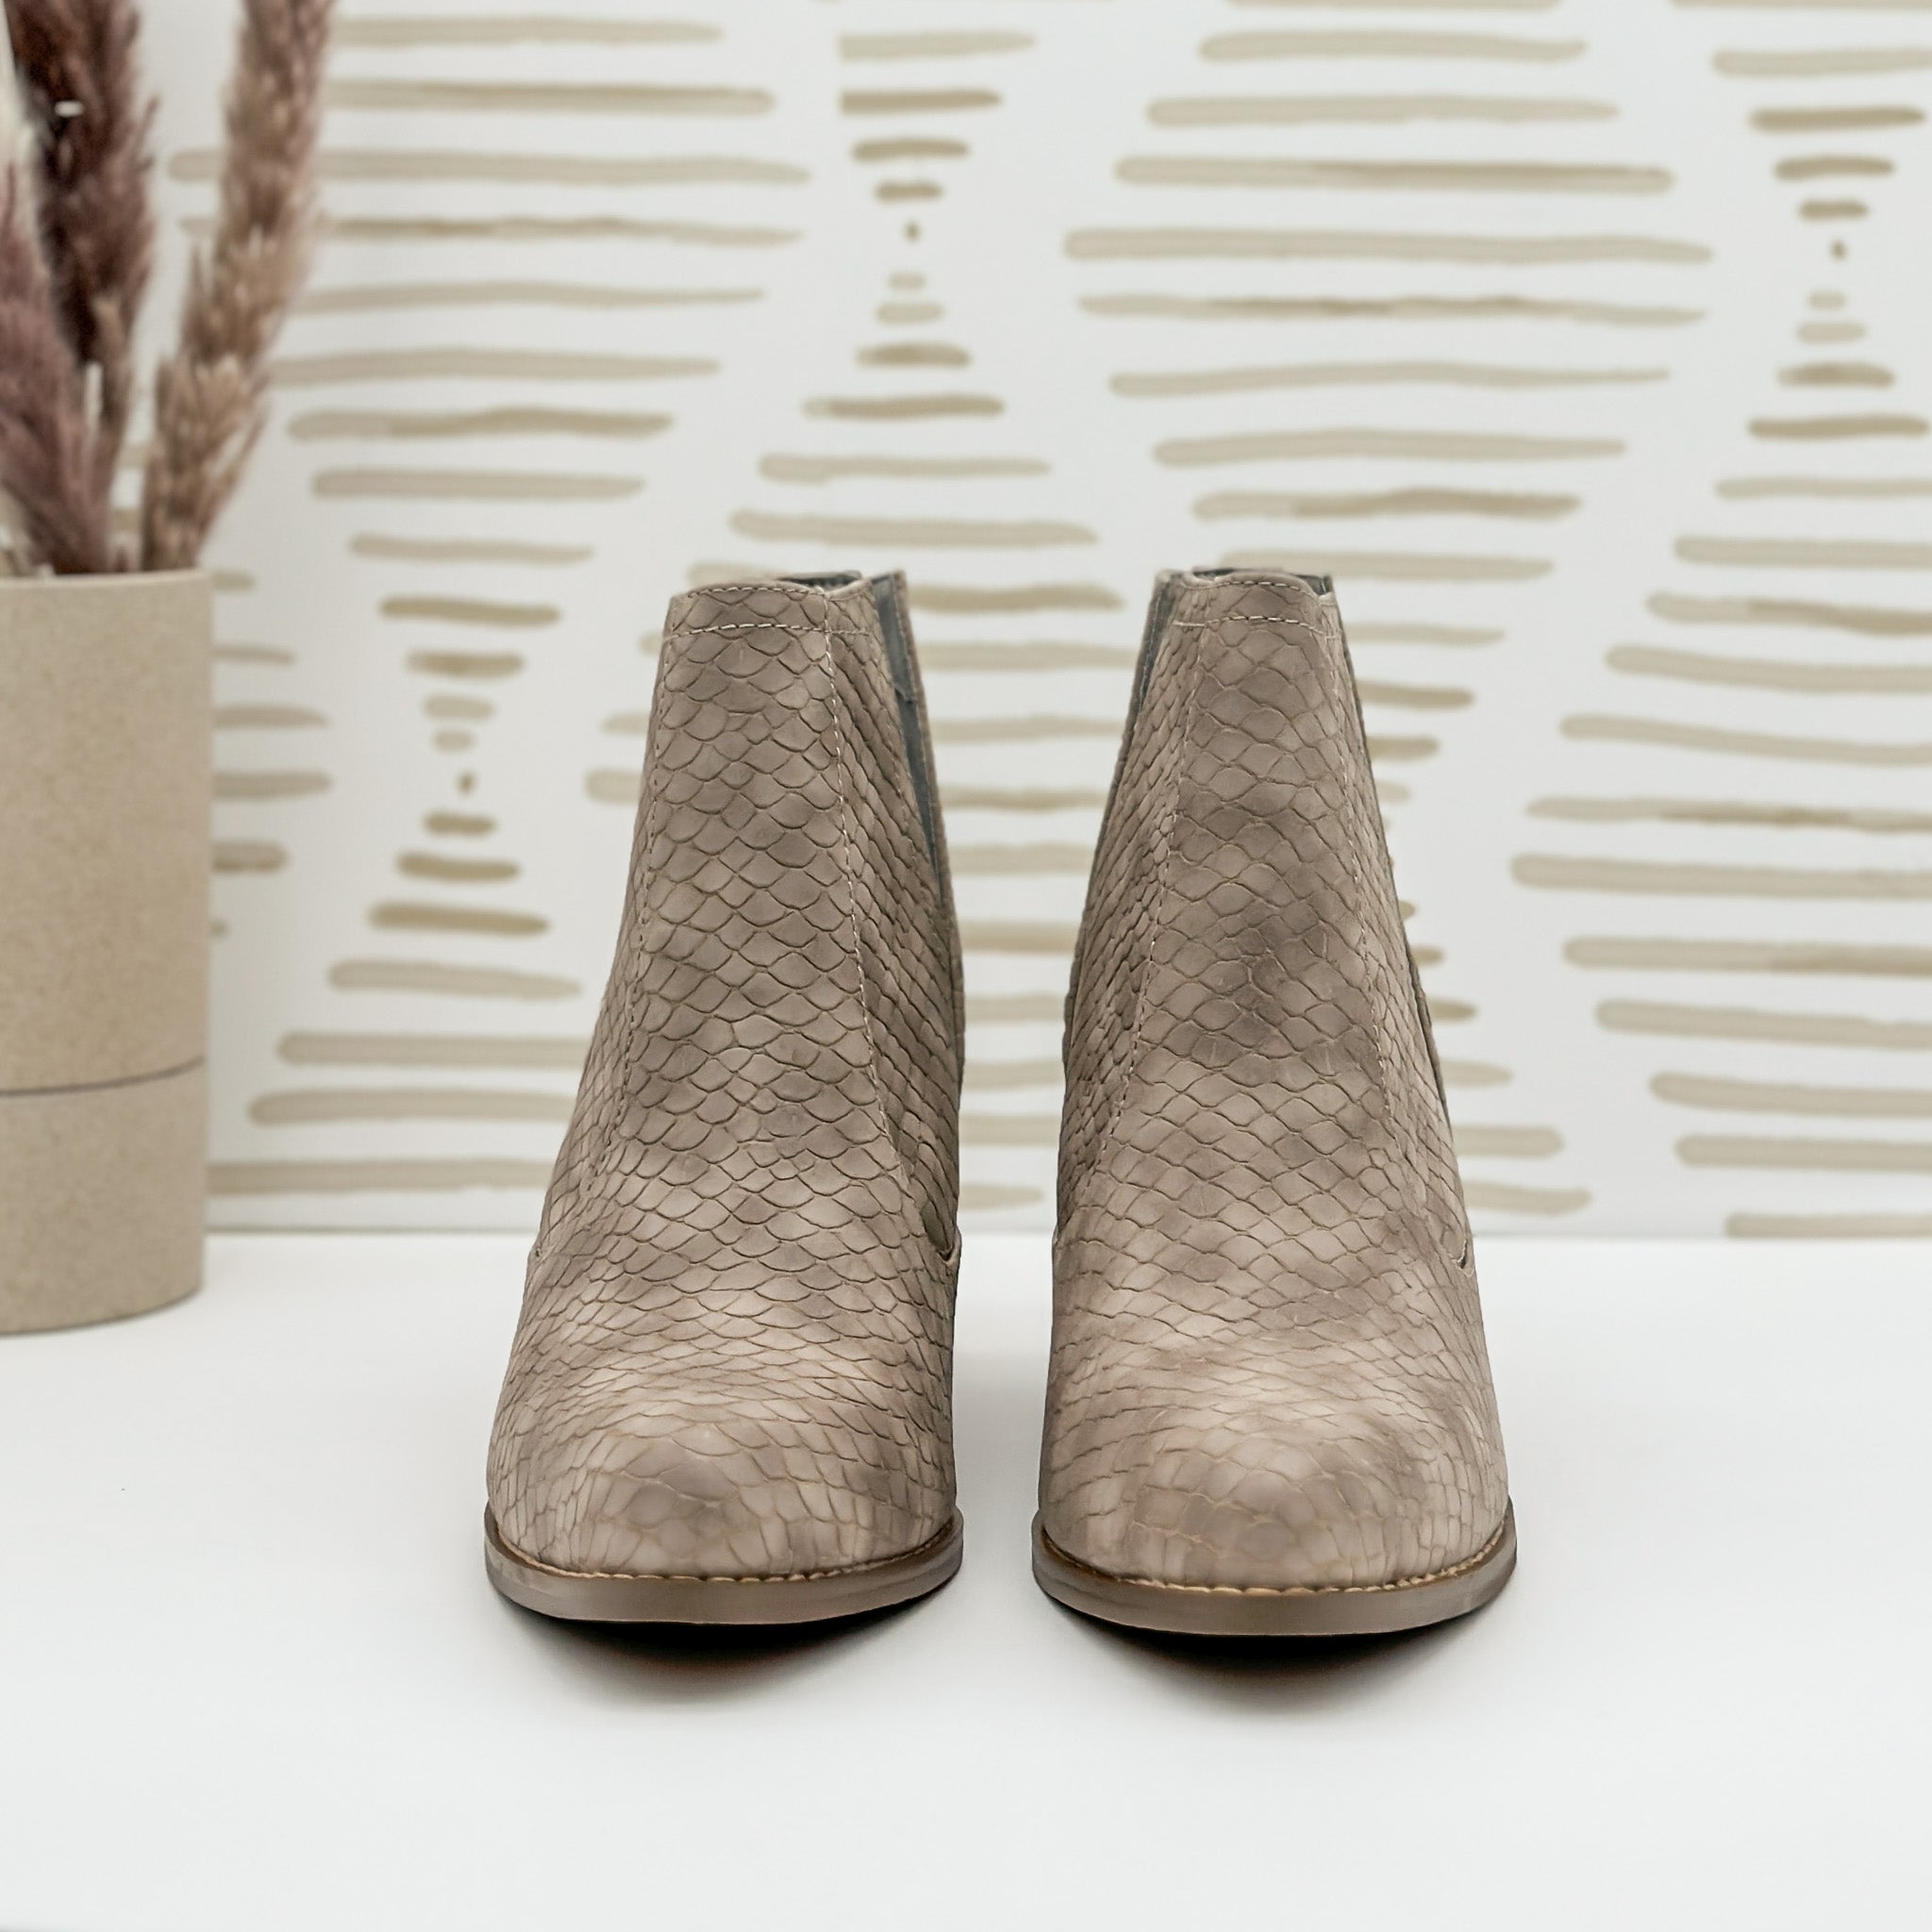 Tarim Bootie in Taupe